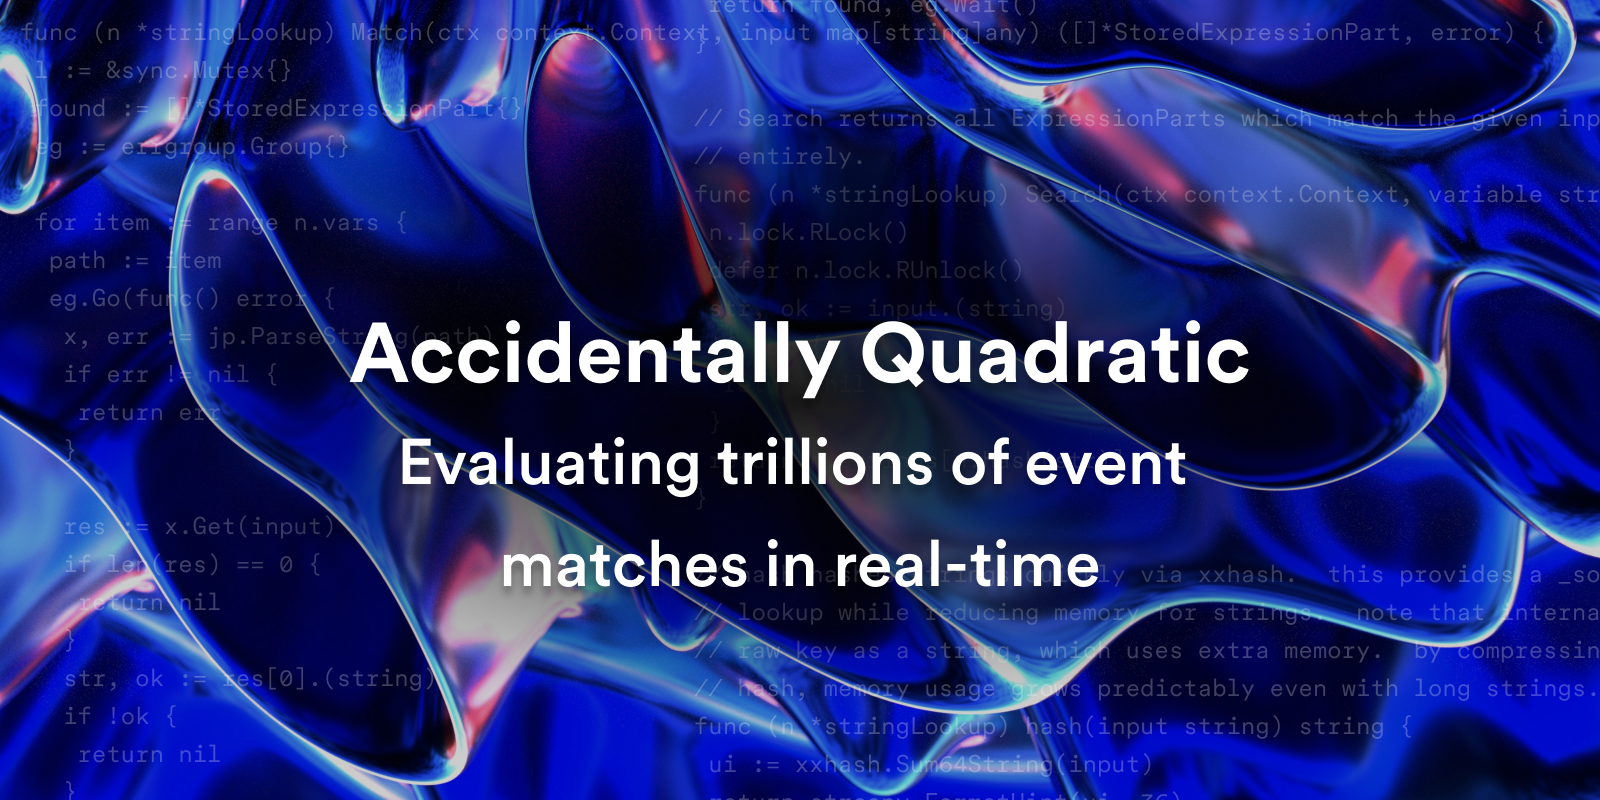 Featured image for Accidentally Quadratic: Evaluating trillions of event matches in real-time blog post